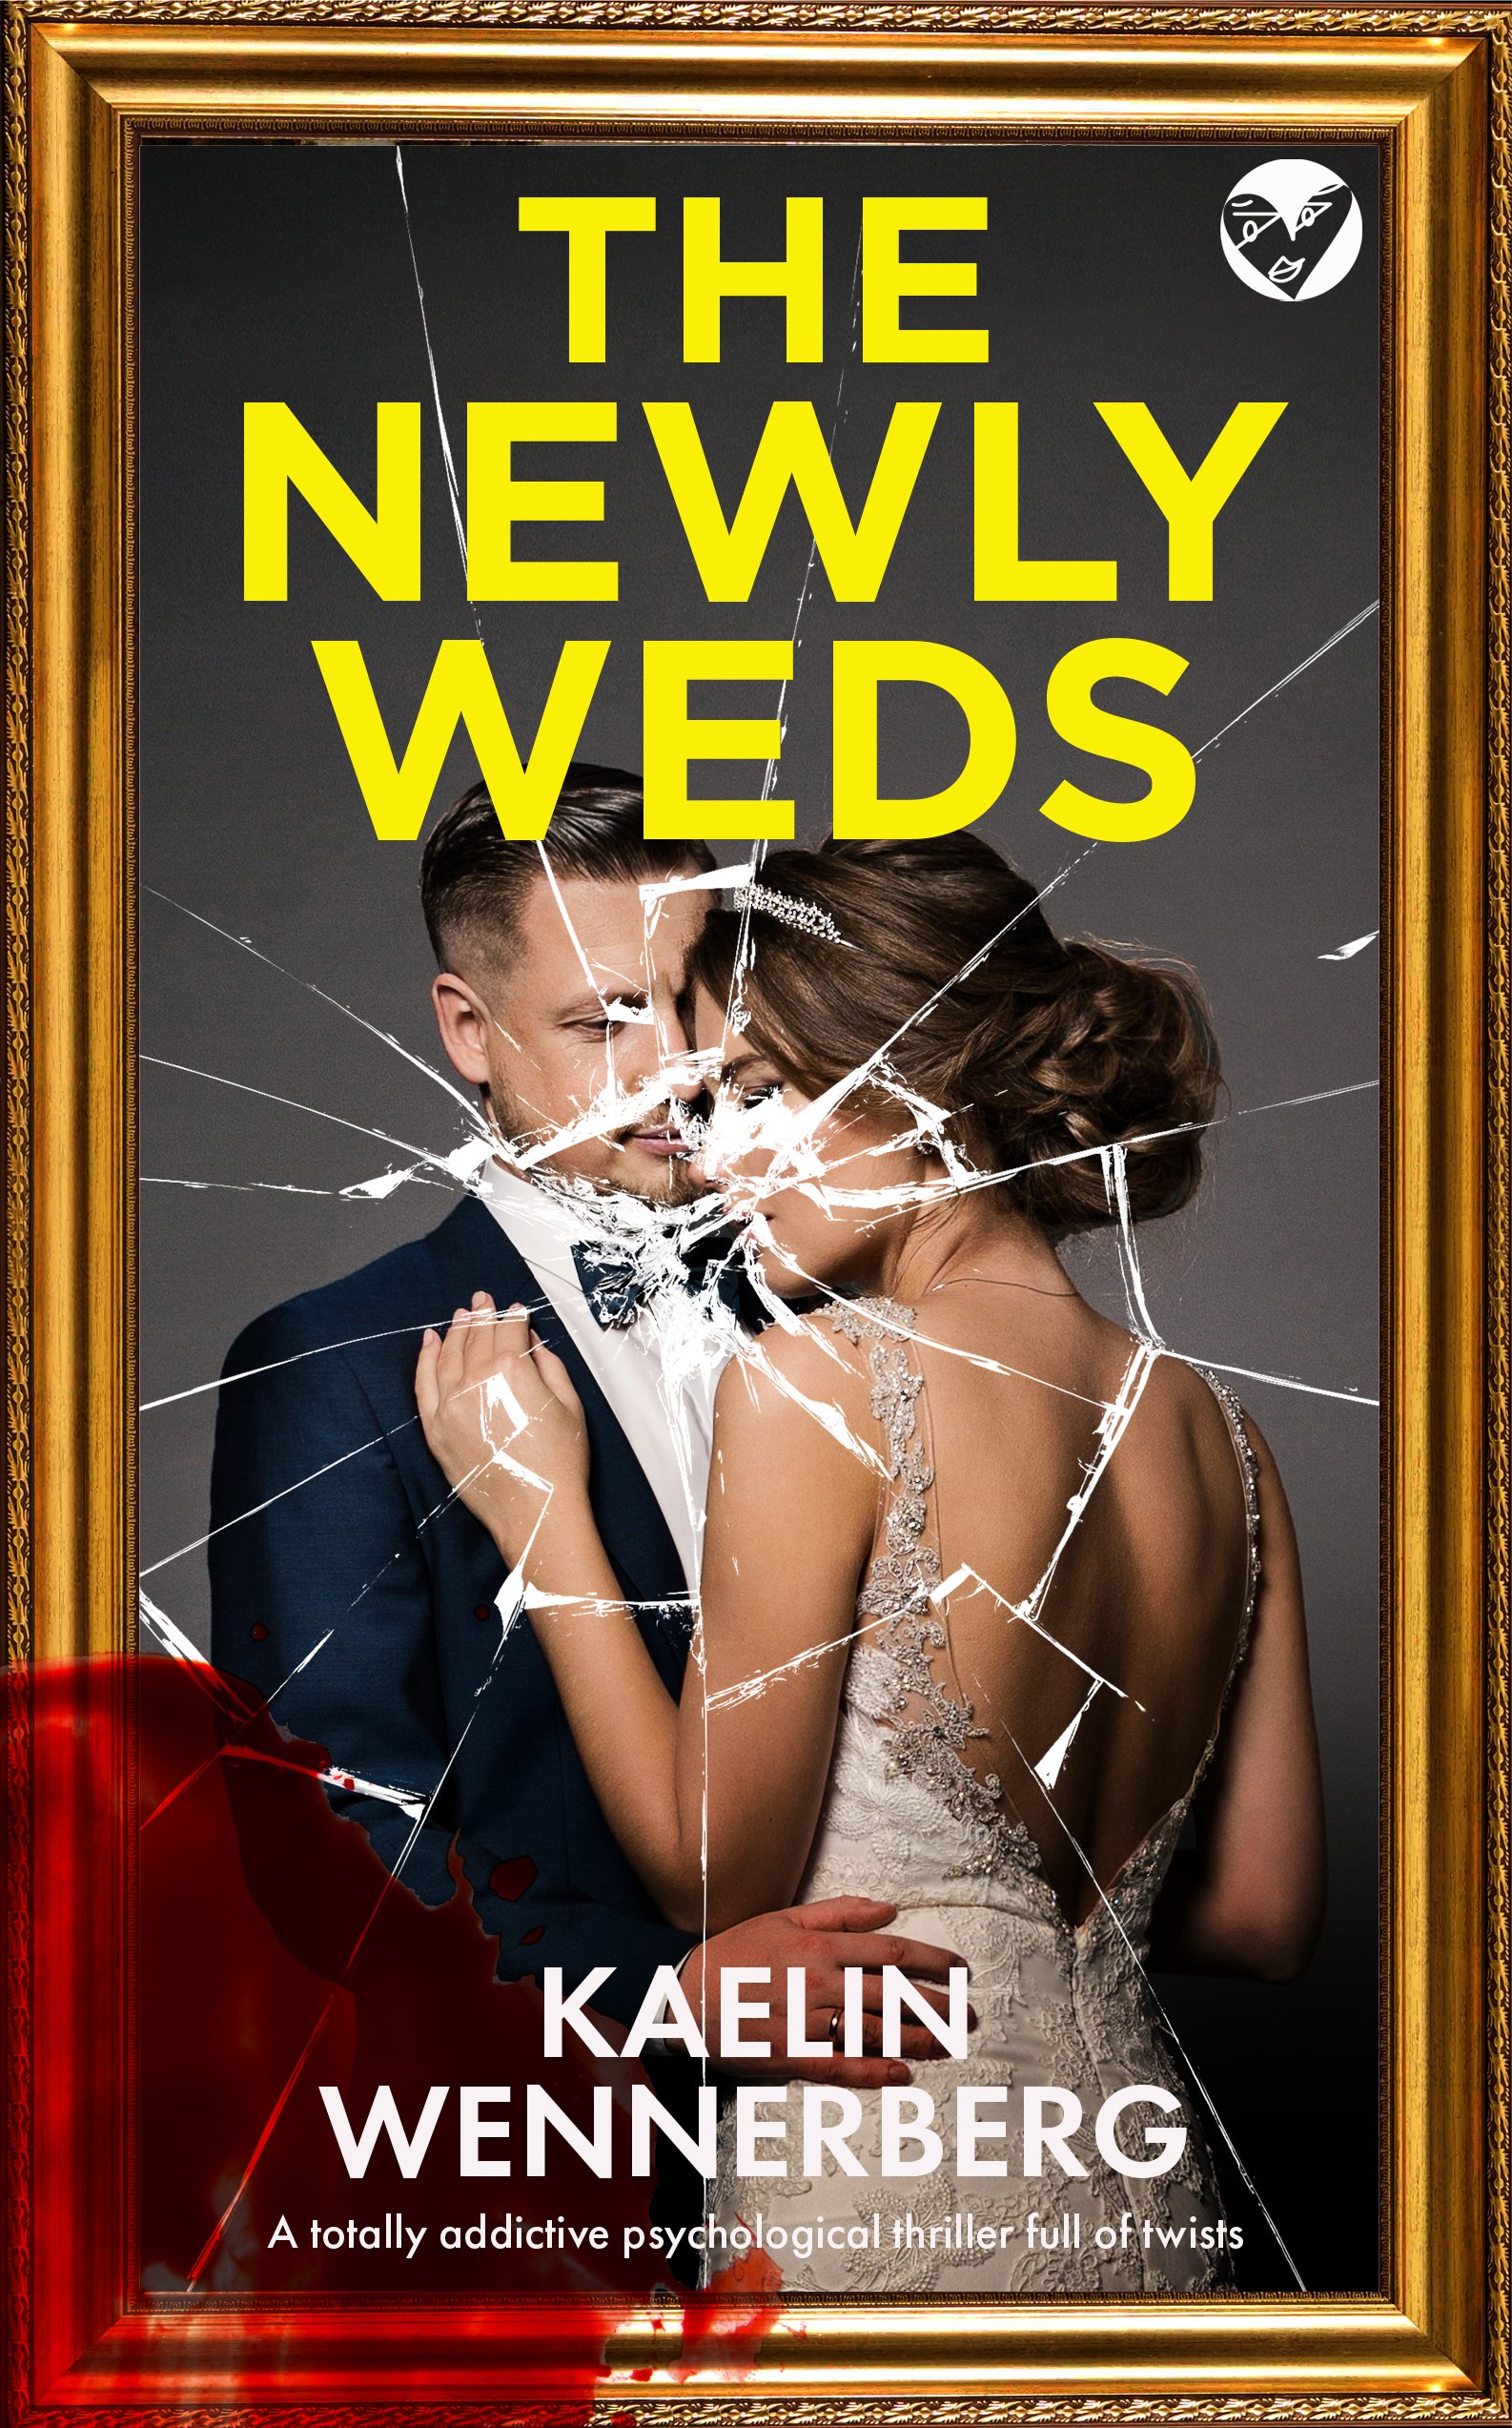 THE NEWLY WEDS Cover publish.jpg